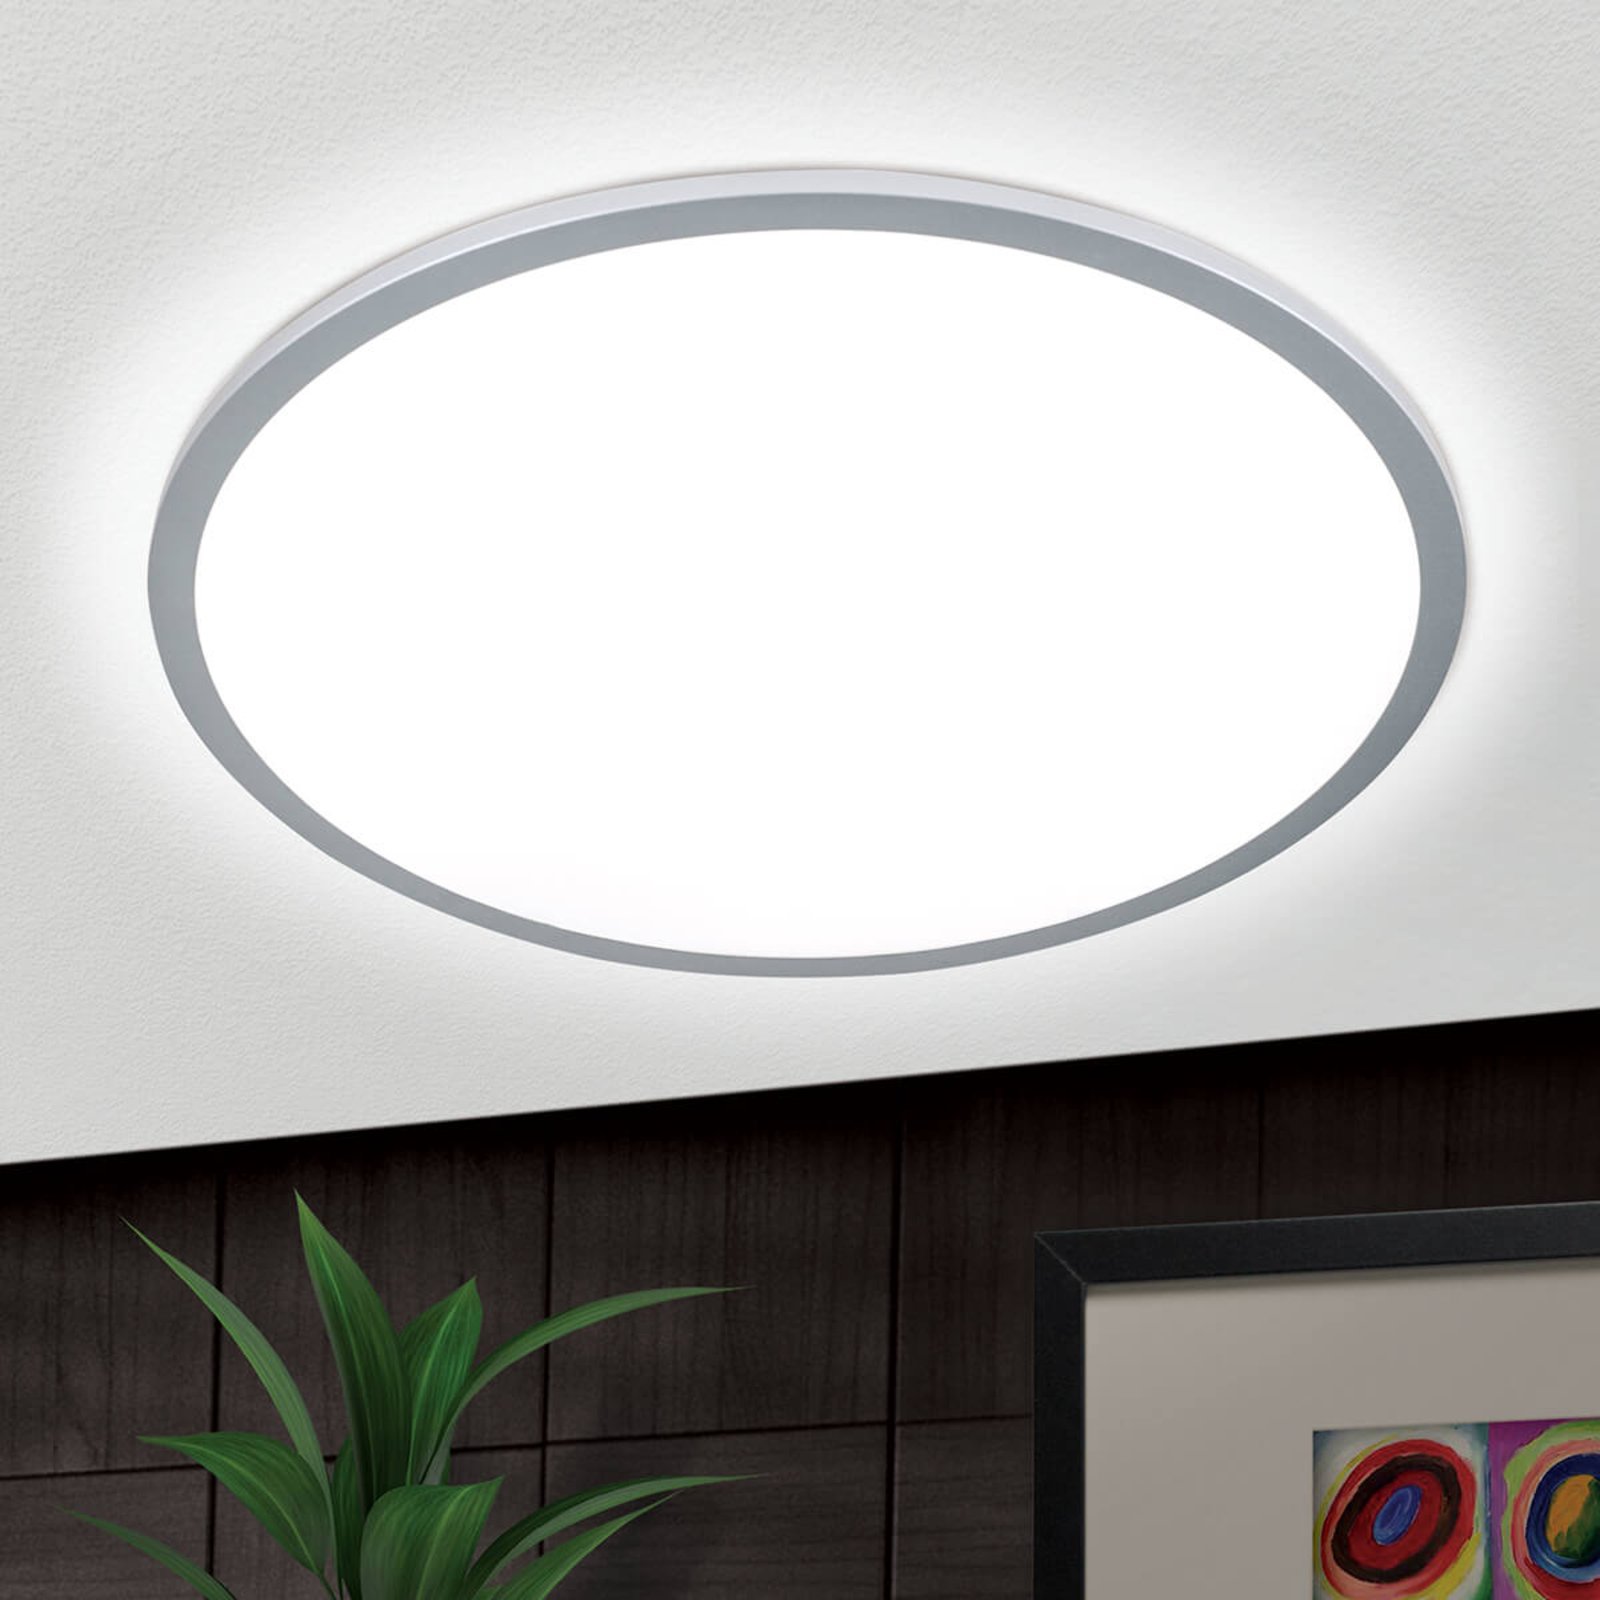 LED ceiling lamp Aria, dimmable - 60 cm